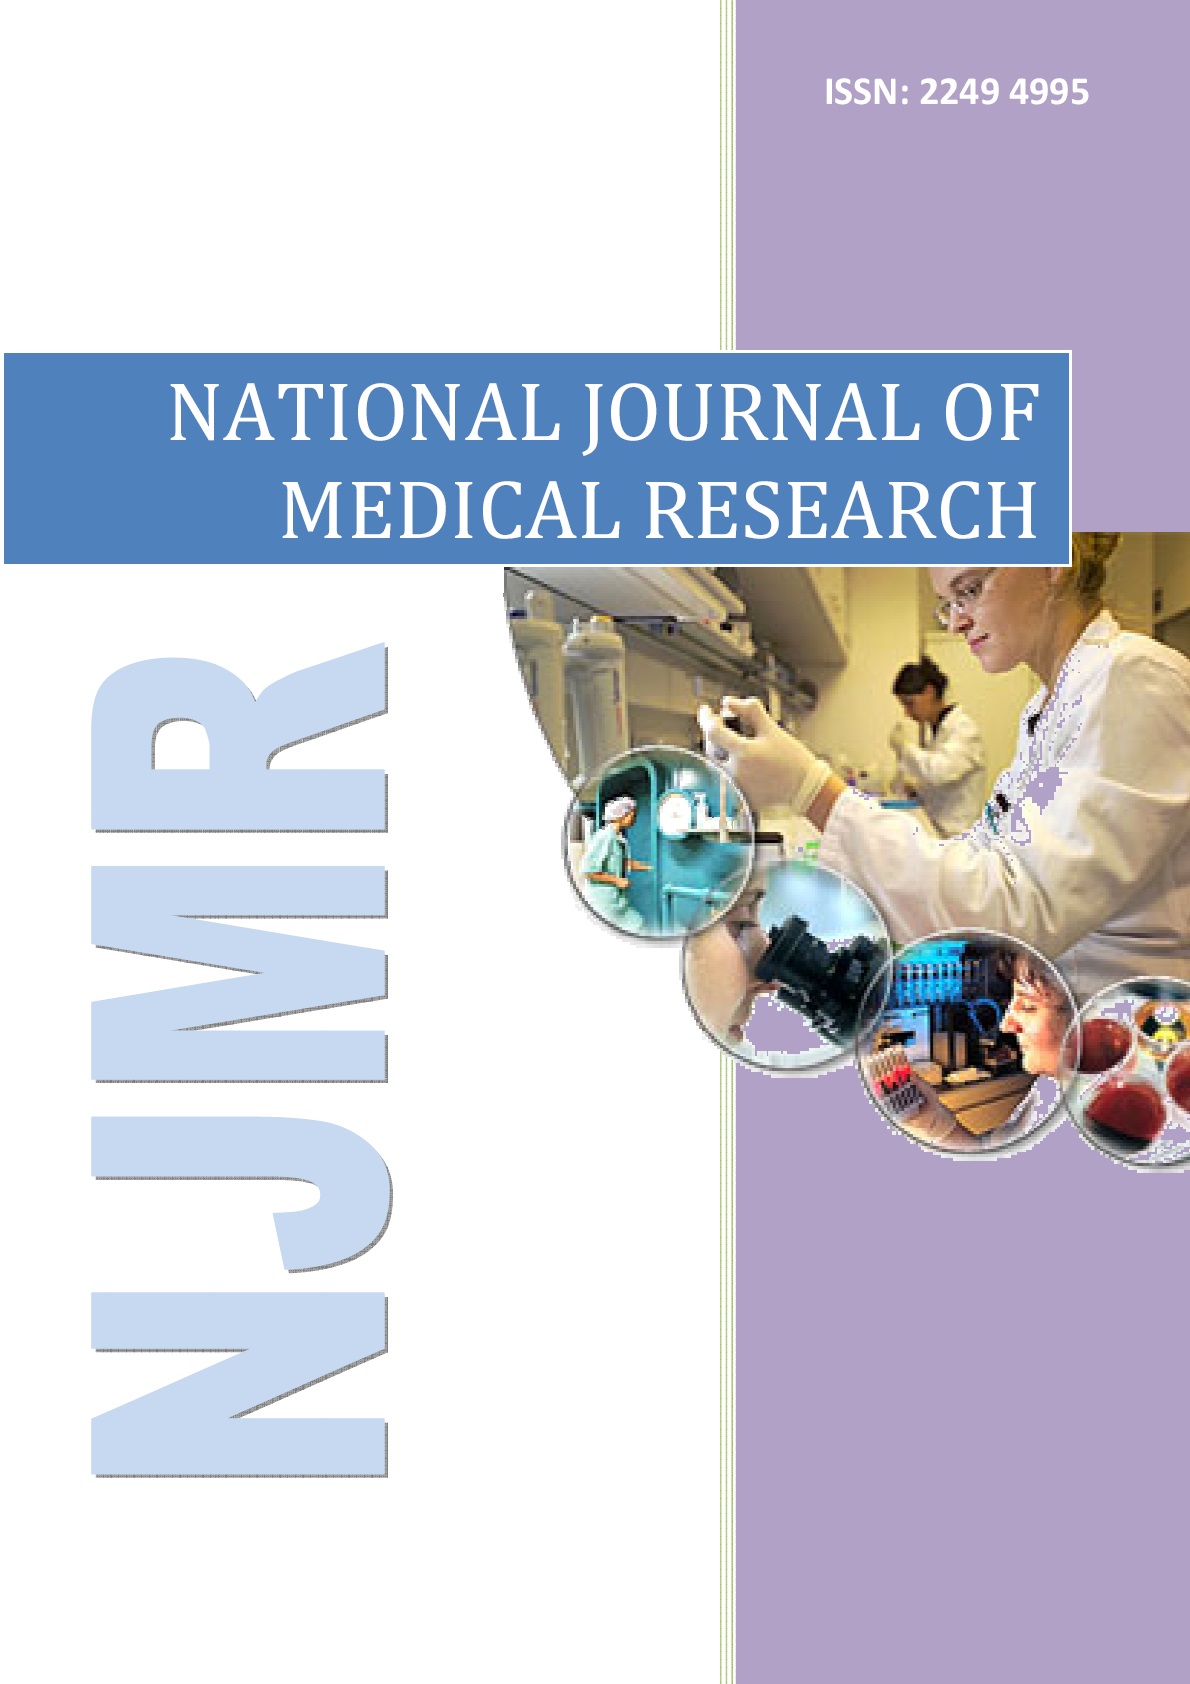 what is the rank of medical research archives journal